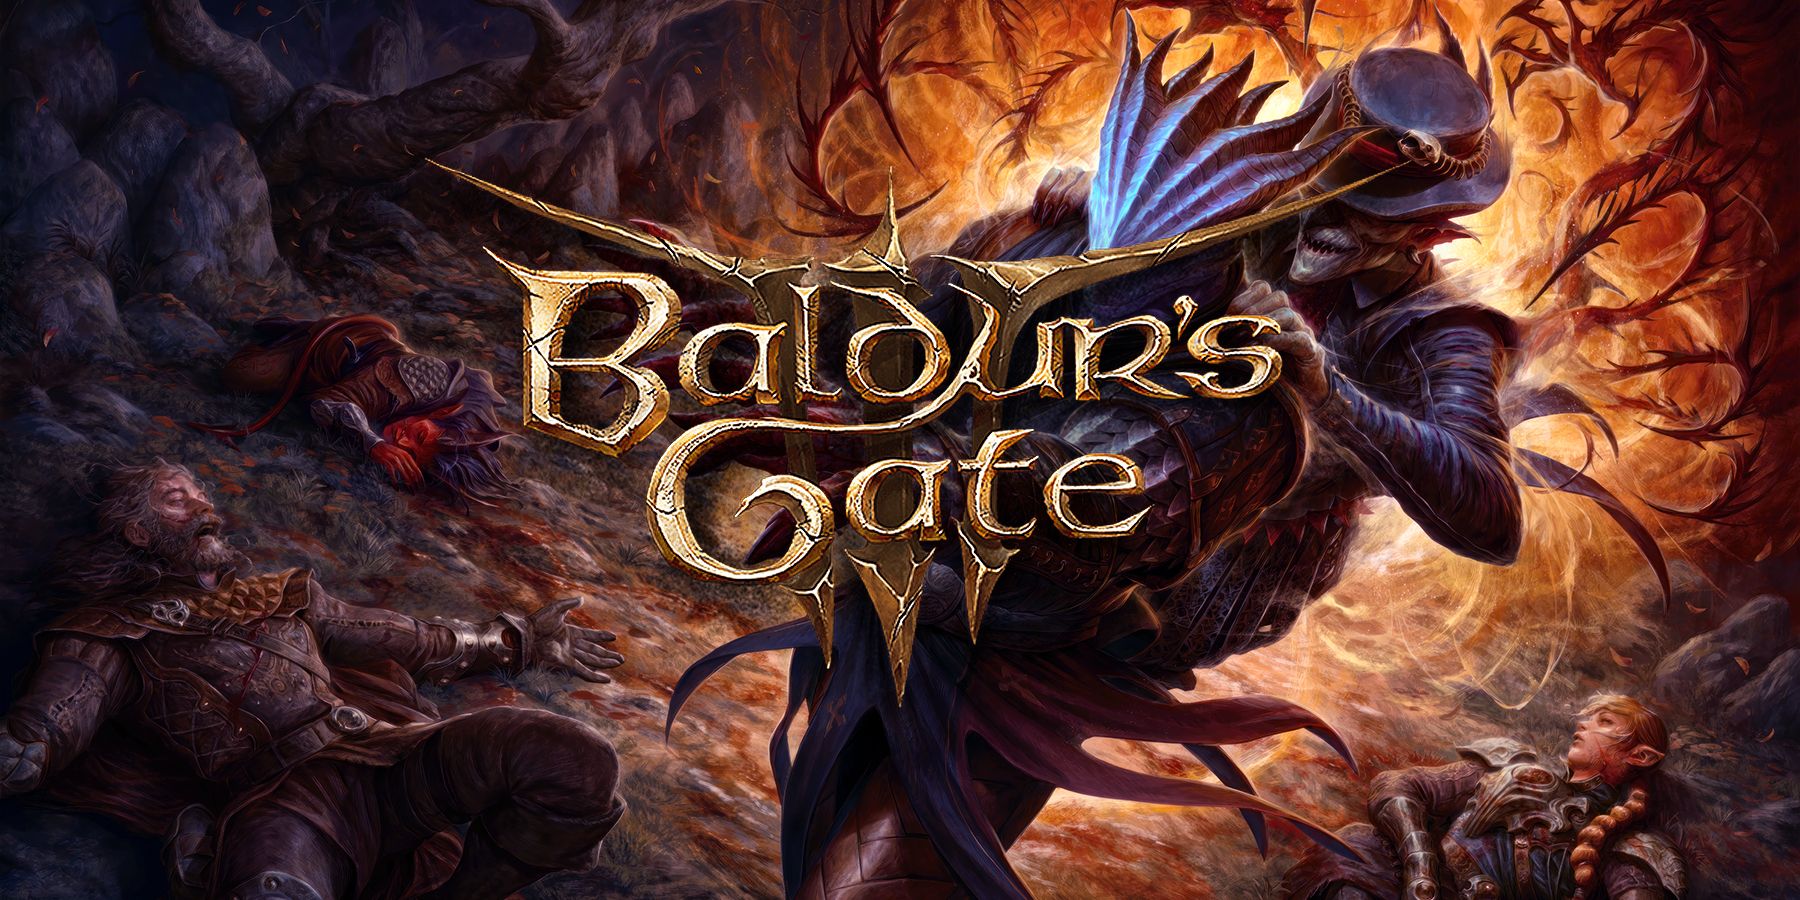 Baldur's Gate 3 on X: Playable-on-disc? Must be the Baldur's Gate 3 -  Deluxe Edition. Preorder:  The Deluxe Edition for  PS5, Xbox, and PC includes the Digital Deluxe edition, as well